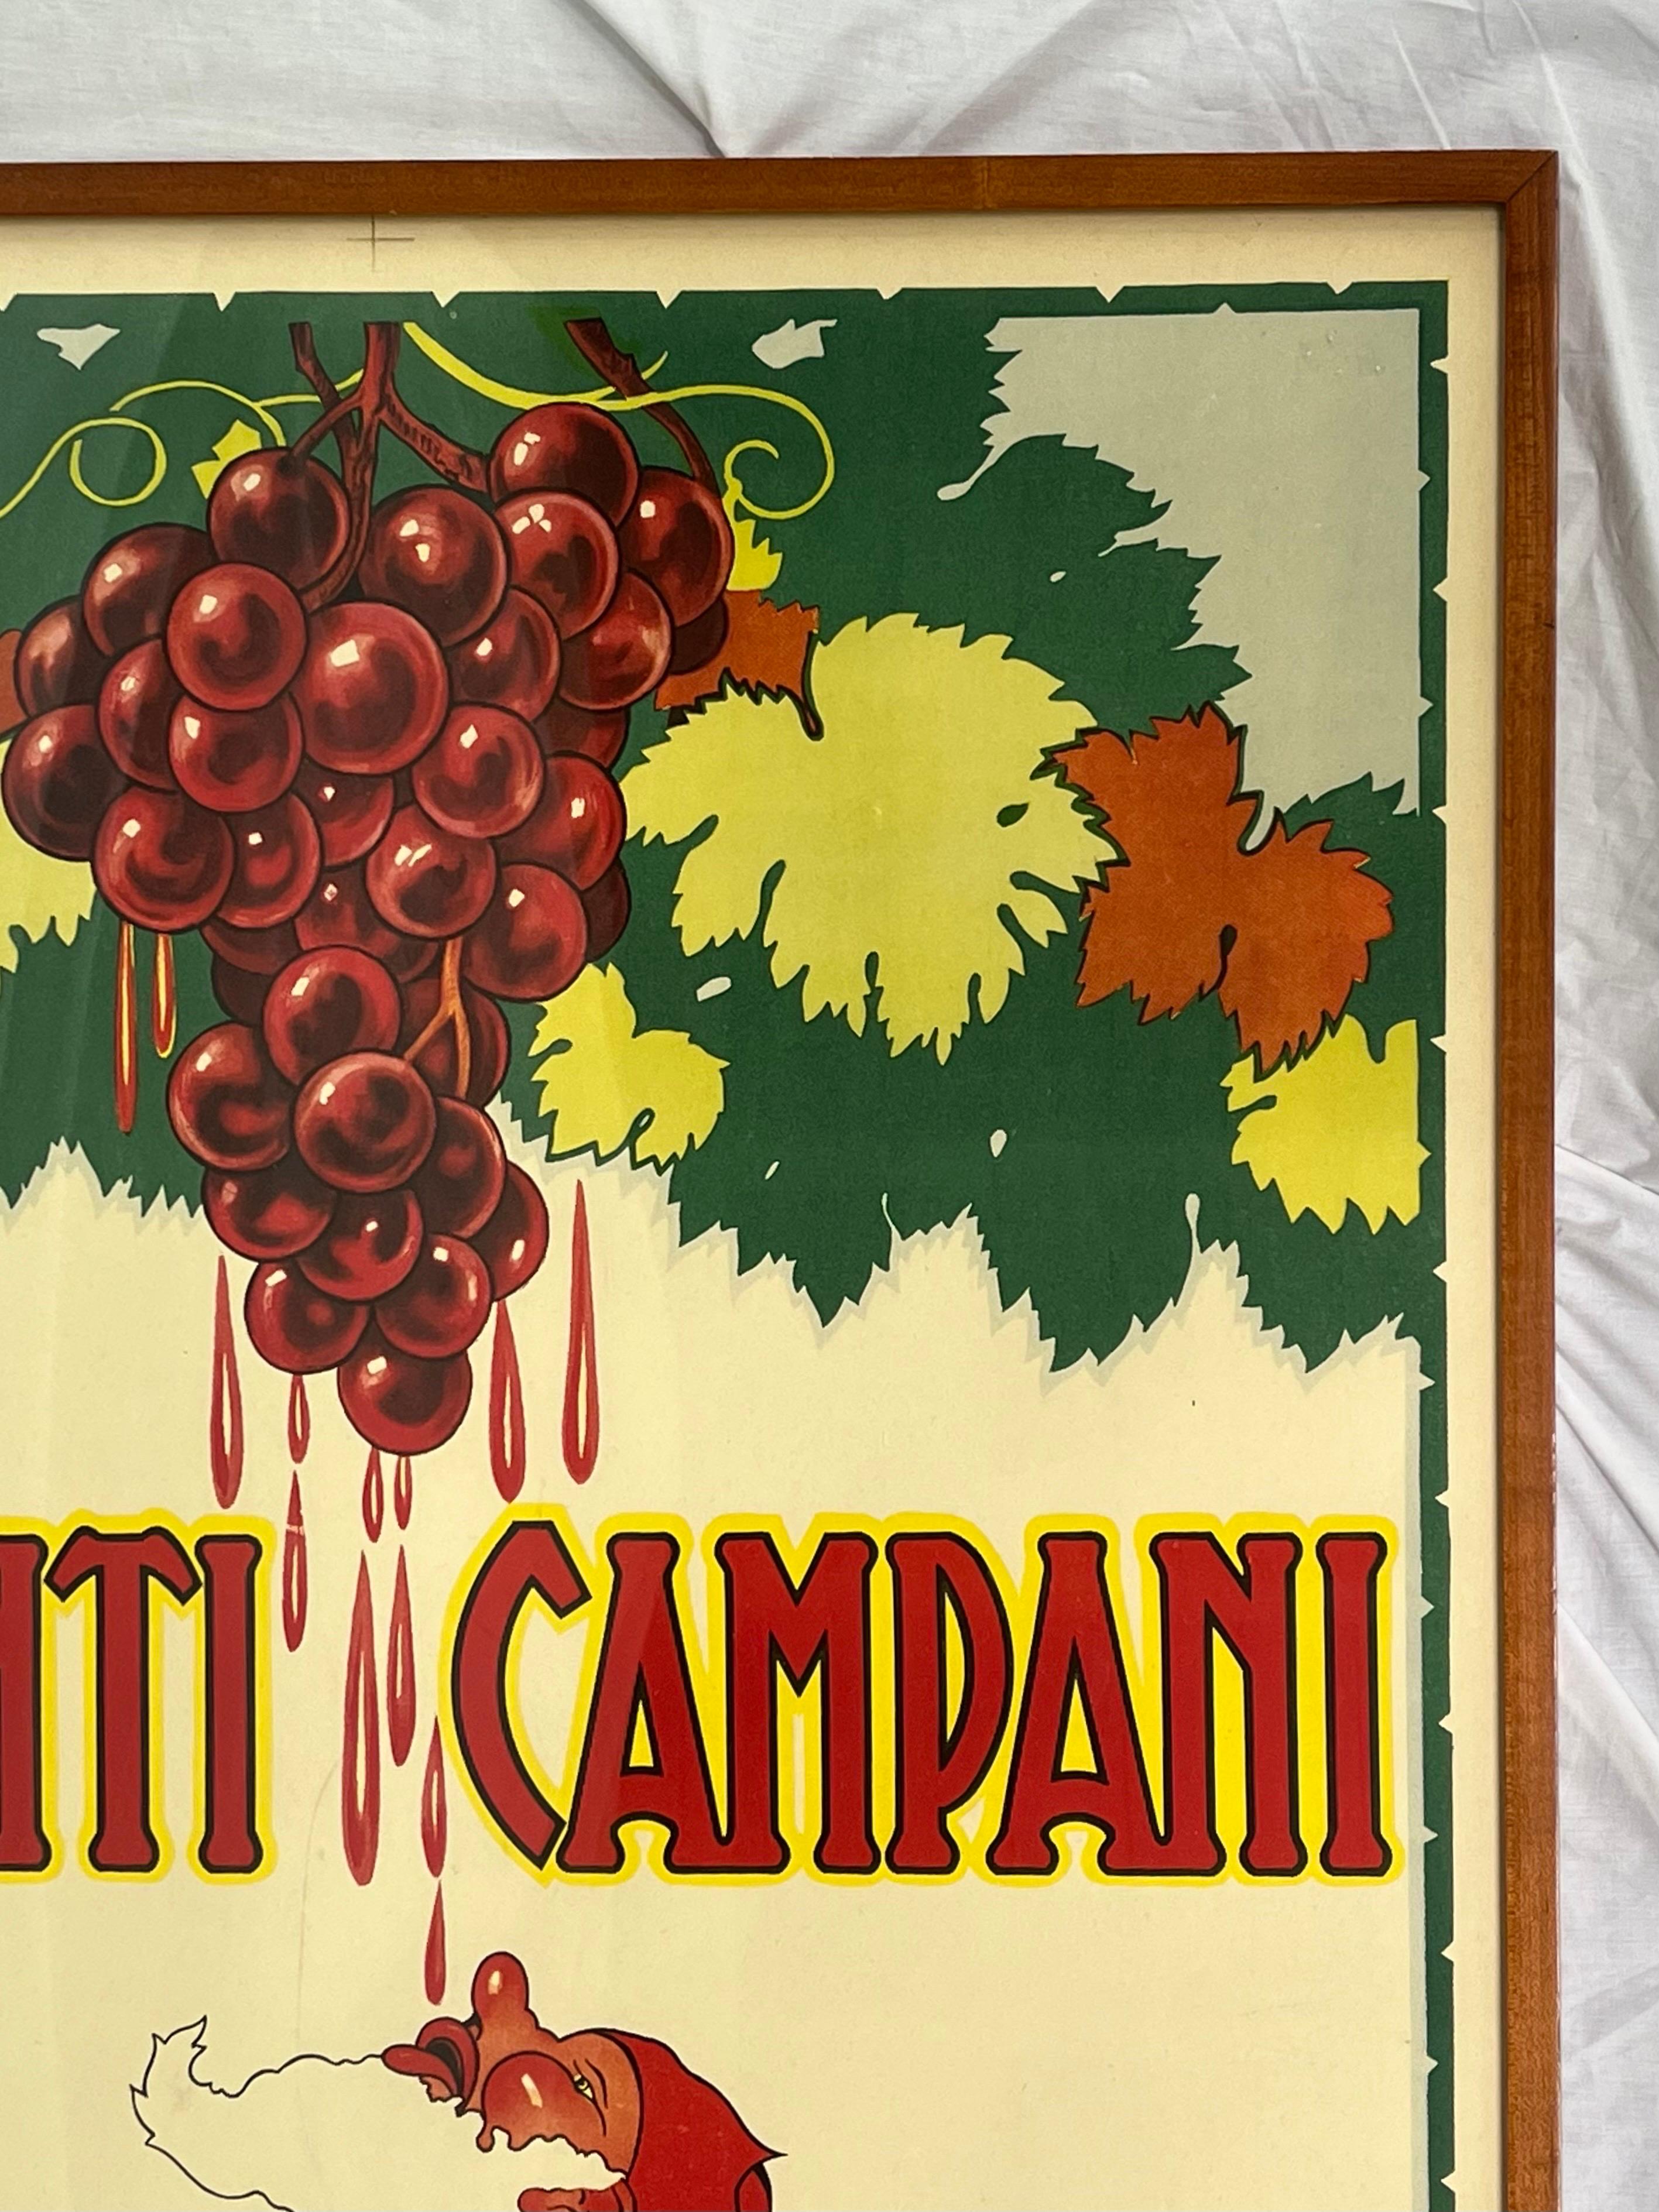 Chianti Campani Vintage Midcentury Italian Poster Featuring a Gnome and Wine 2